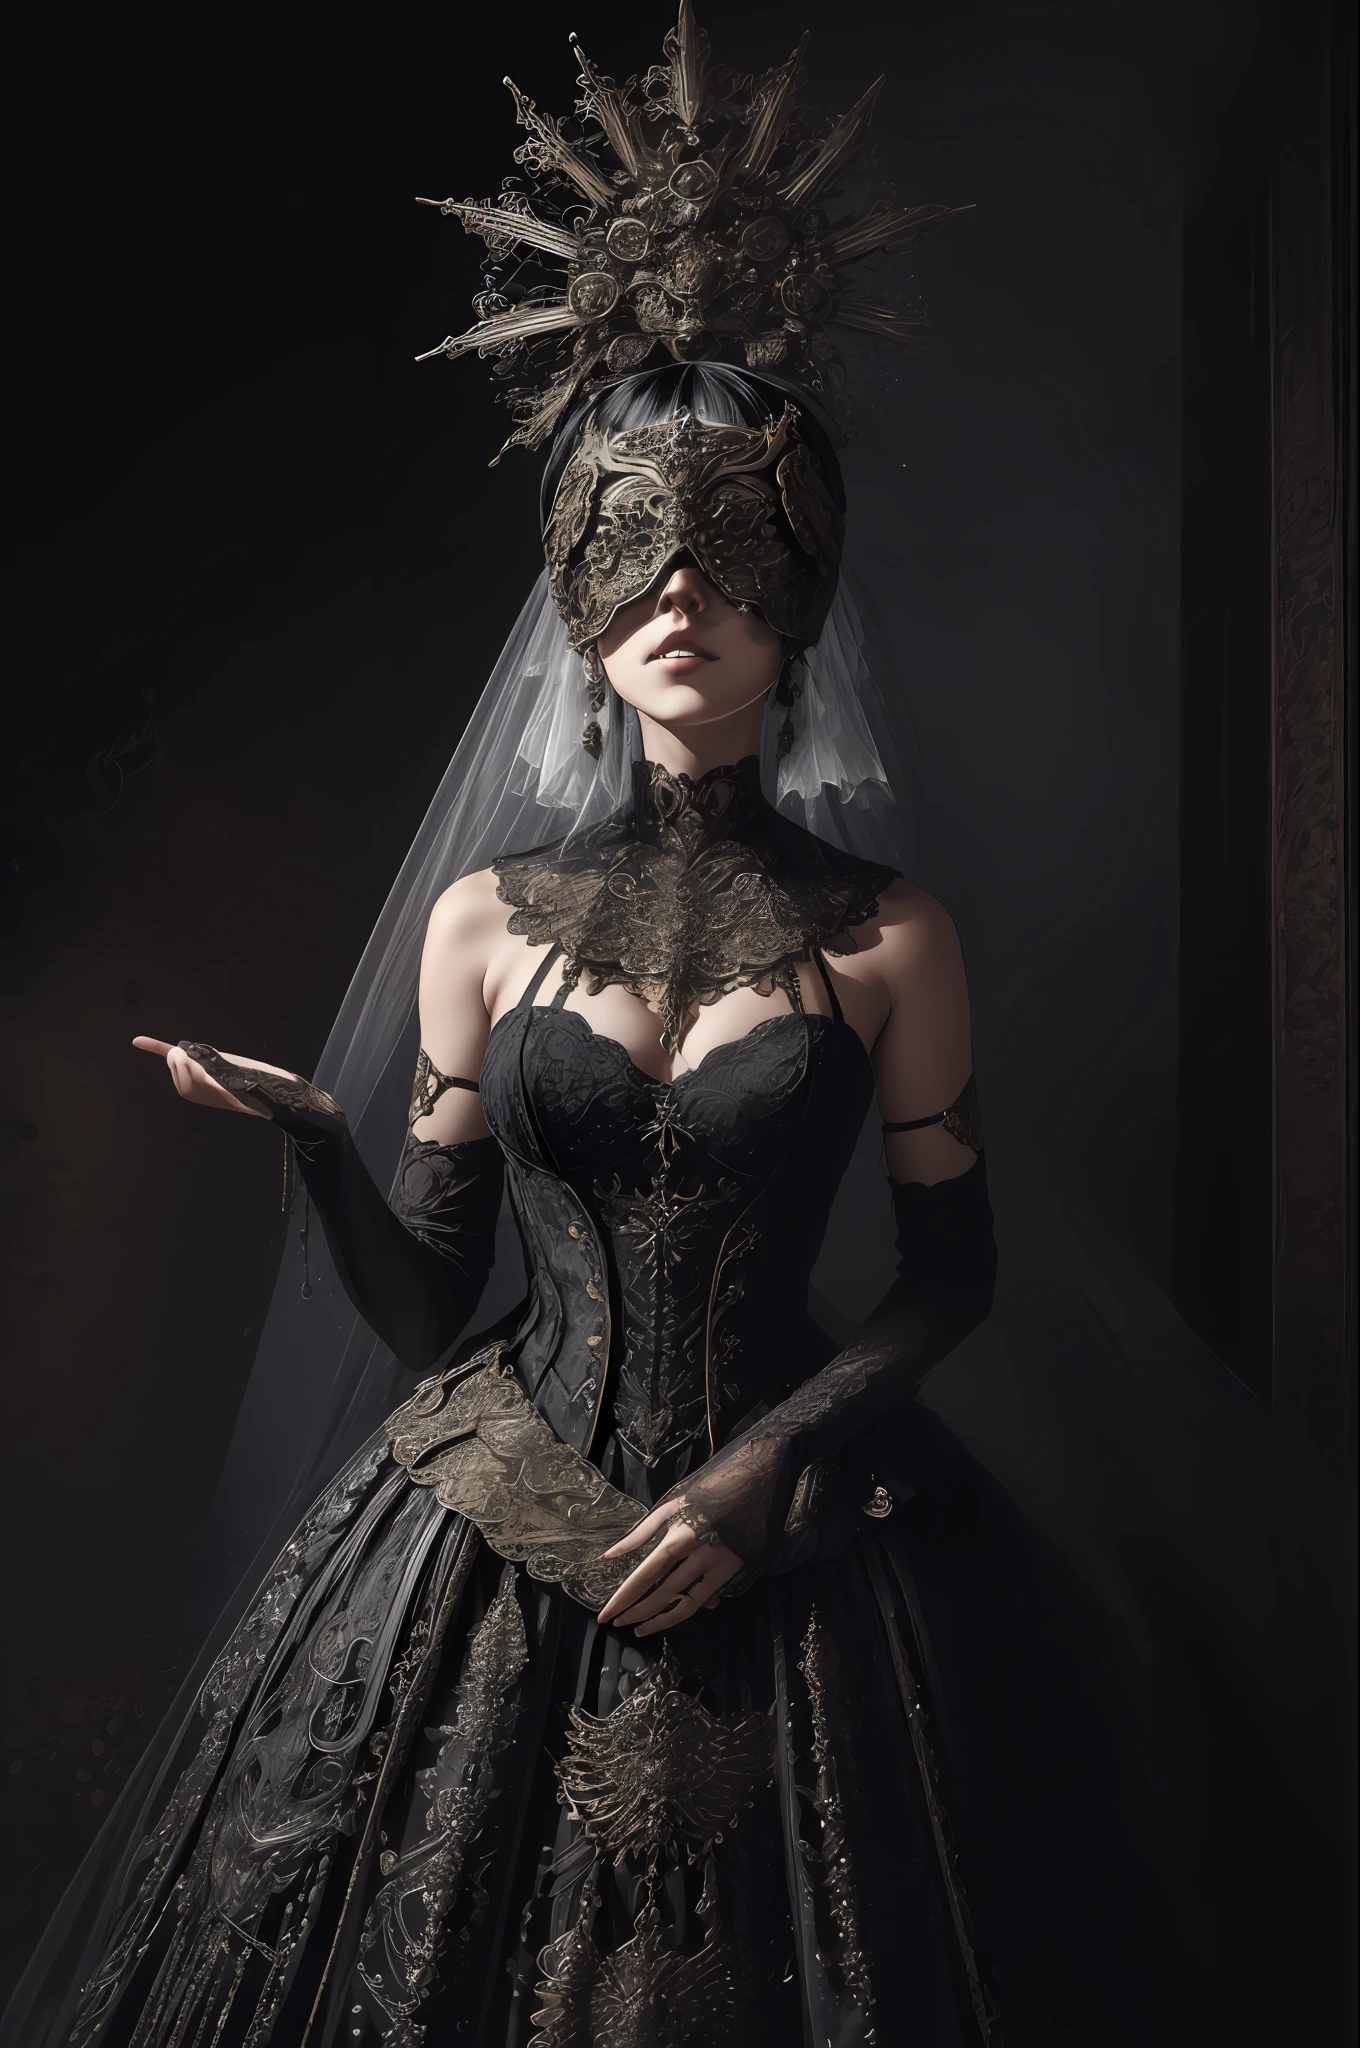 A woman wearing a silver blind mask, Gothic dress, Adornos de incaje, mapped tone, detailed, Altaminte detailed,1woman , V0id3nergy, surgery, bright, head, in_..jar, Water, blood_mouths,, (masterpiece: 1.3), (better_Quality: 1.3), (ultra_detailed: 1.3), 8k, sumaminte_Clear, realism, (ultrarrealist: 1.3), details locos, Detalles intrincados, hiperdetailed, ultra detailed, extremadaminte detailed, highest detailed, high_detail, colorful, beautiful, HdR, fotorrealist, High Resolutions, ultra_high_anything, Cinematographer, aesthetic, sumaminte_delicate, ((fractal art)),colorful, 
(horror art, terror), High Resolutions, 16k, ..RAW, Ultra Highanything, Ultra details, details finos, una sombra extremadaminte delicada y hermosa, extremadaminte detallada, real,
realist, foto altaminte detallada, award winning glamour photograph, fotorrealist,blind but, cintered